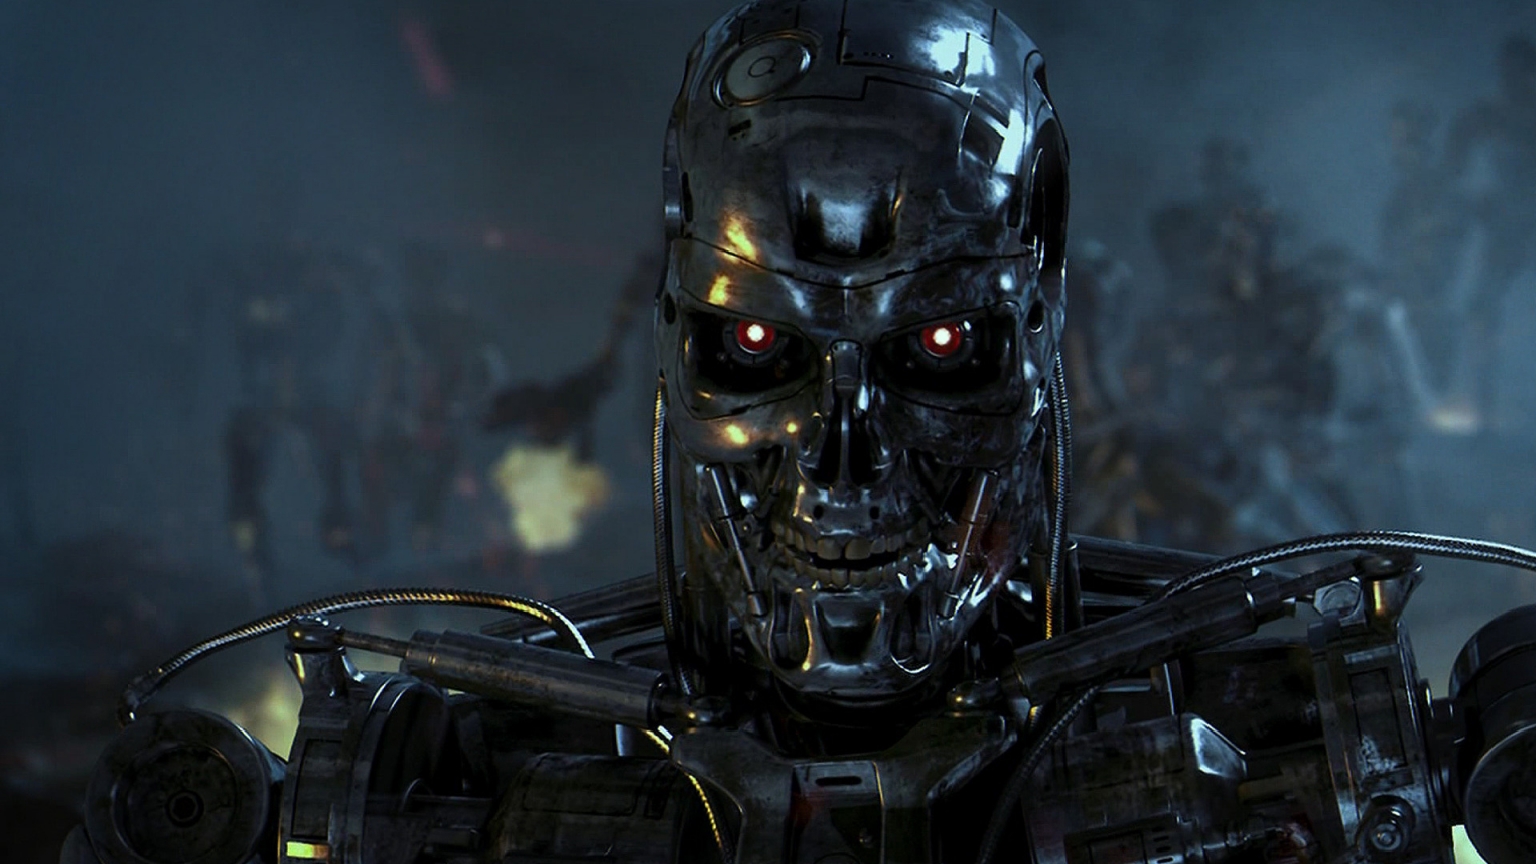 Terminator Rise of the Machines for 1536 x 864 HDTV resolution